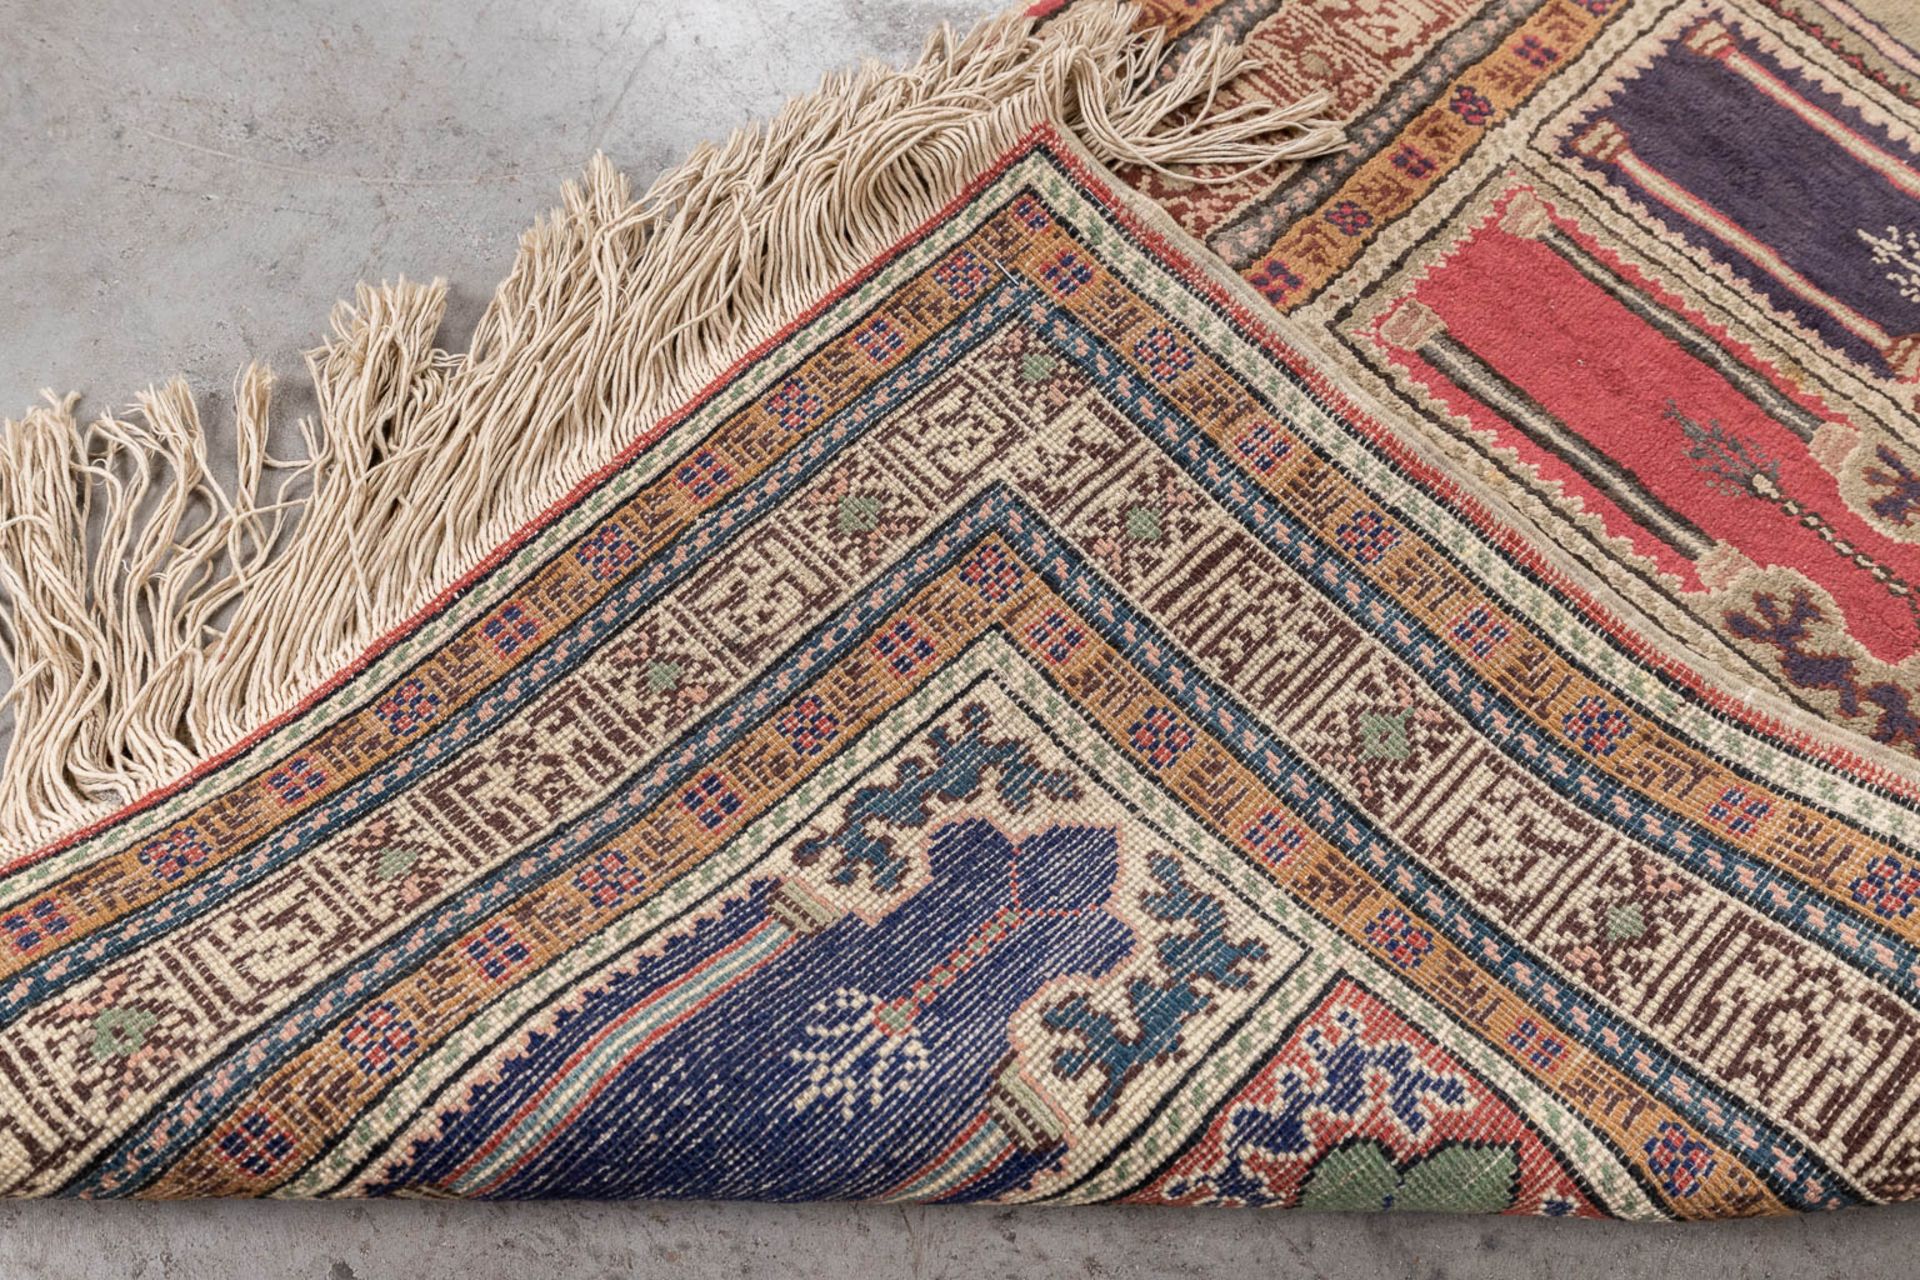 A collection of 2 Oriental hand-made carpets. Persia. (L: 220 x W: 134 cm) - Image 10 of 10